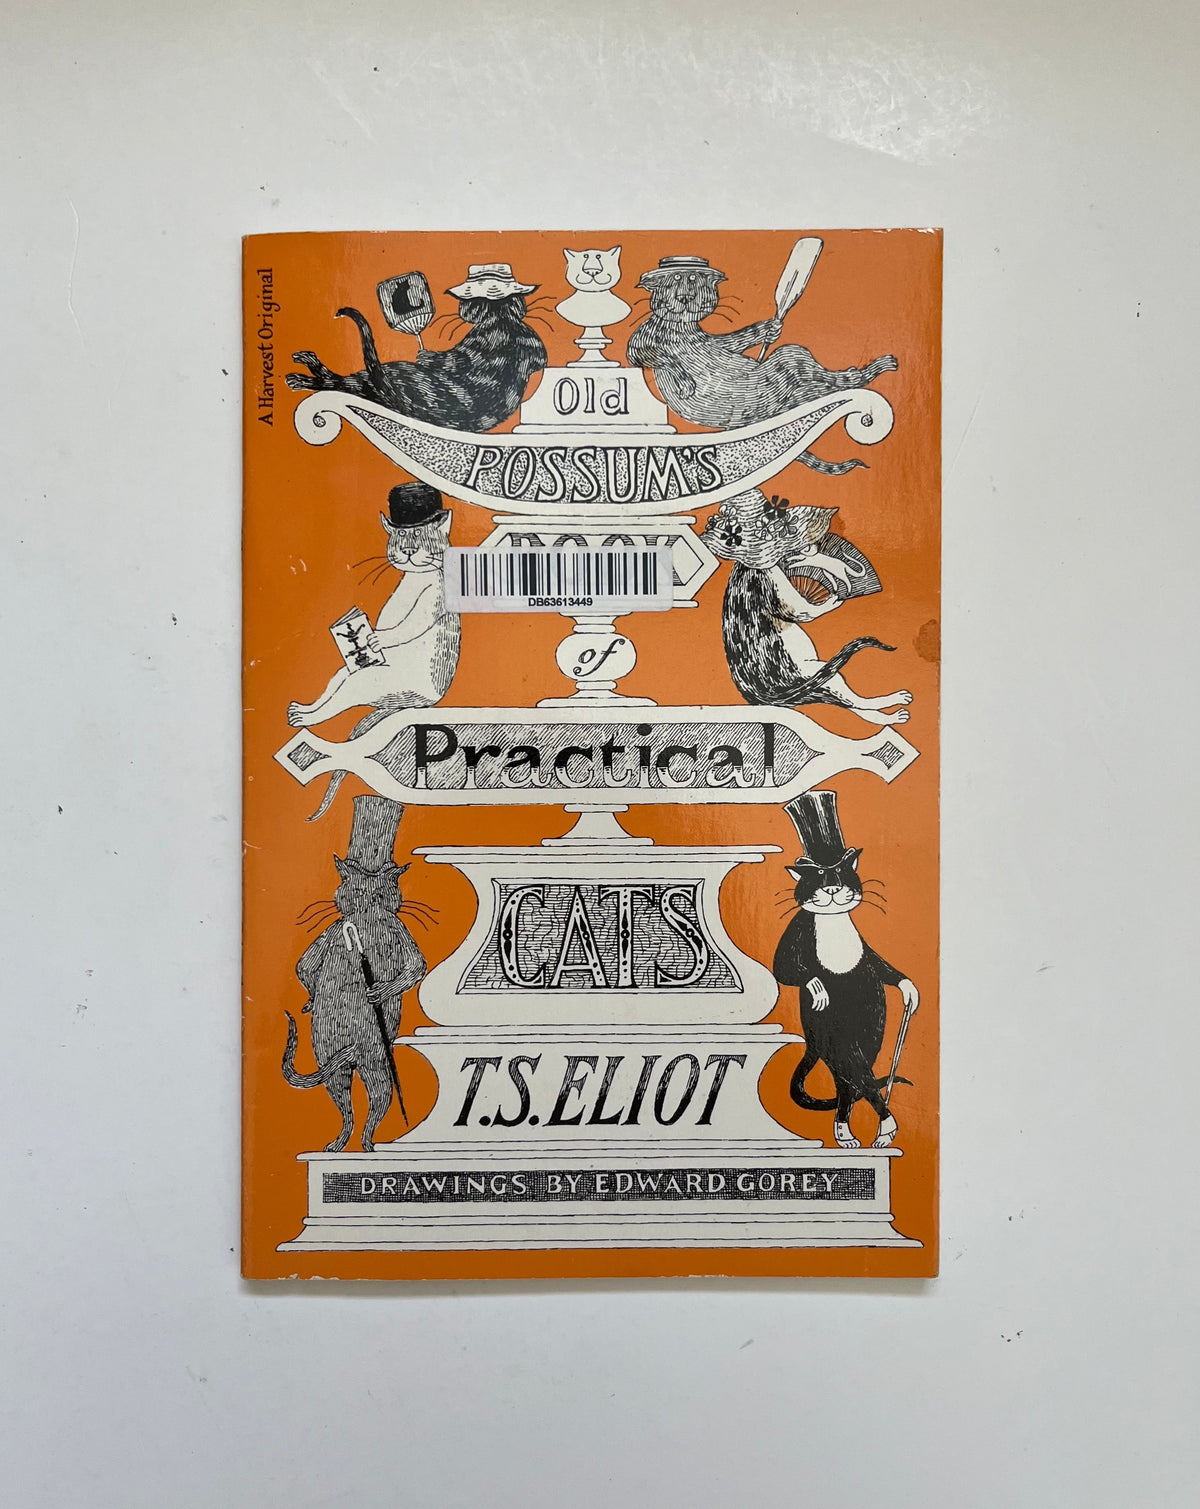 Old Possum&#39;s Book of Practical Cats by T.S. Eliot &amp; Edward Gorey